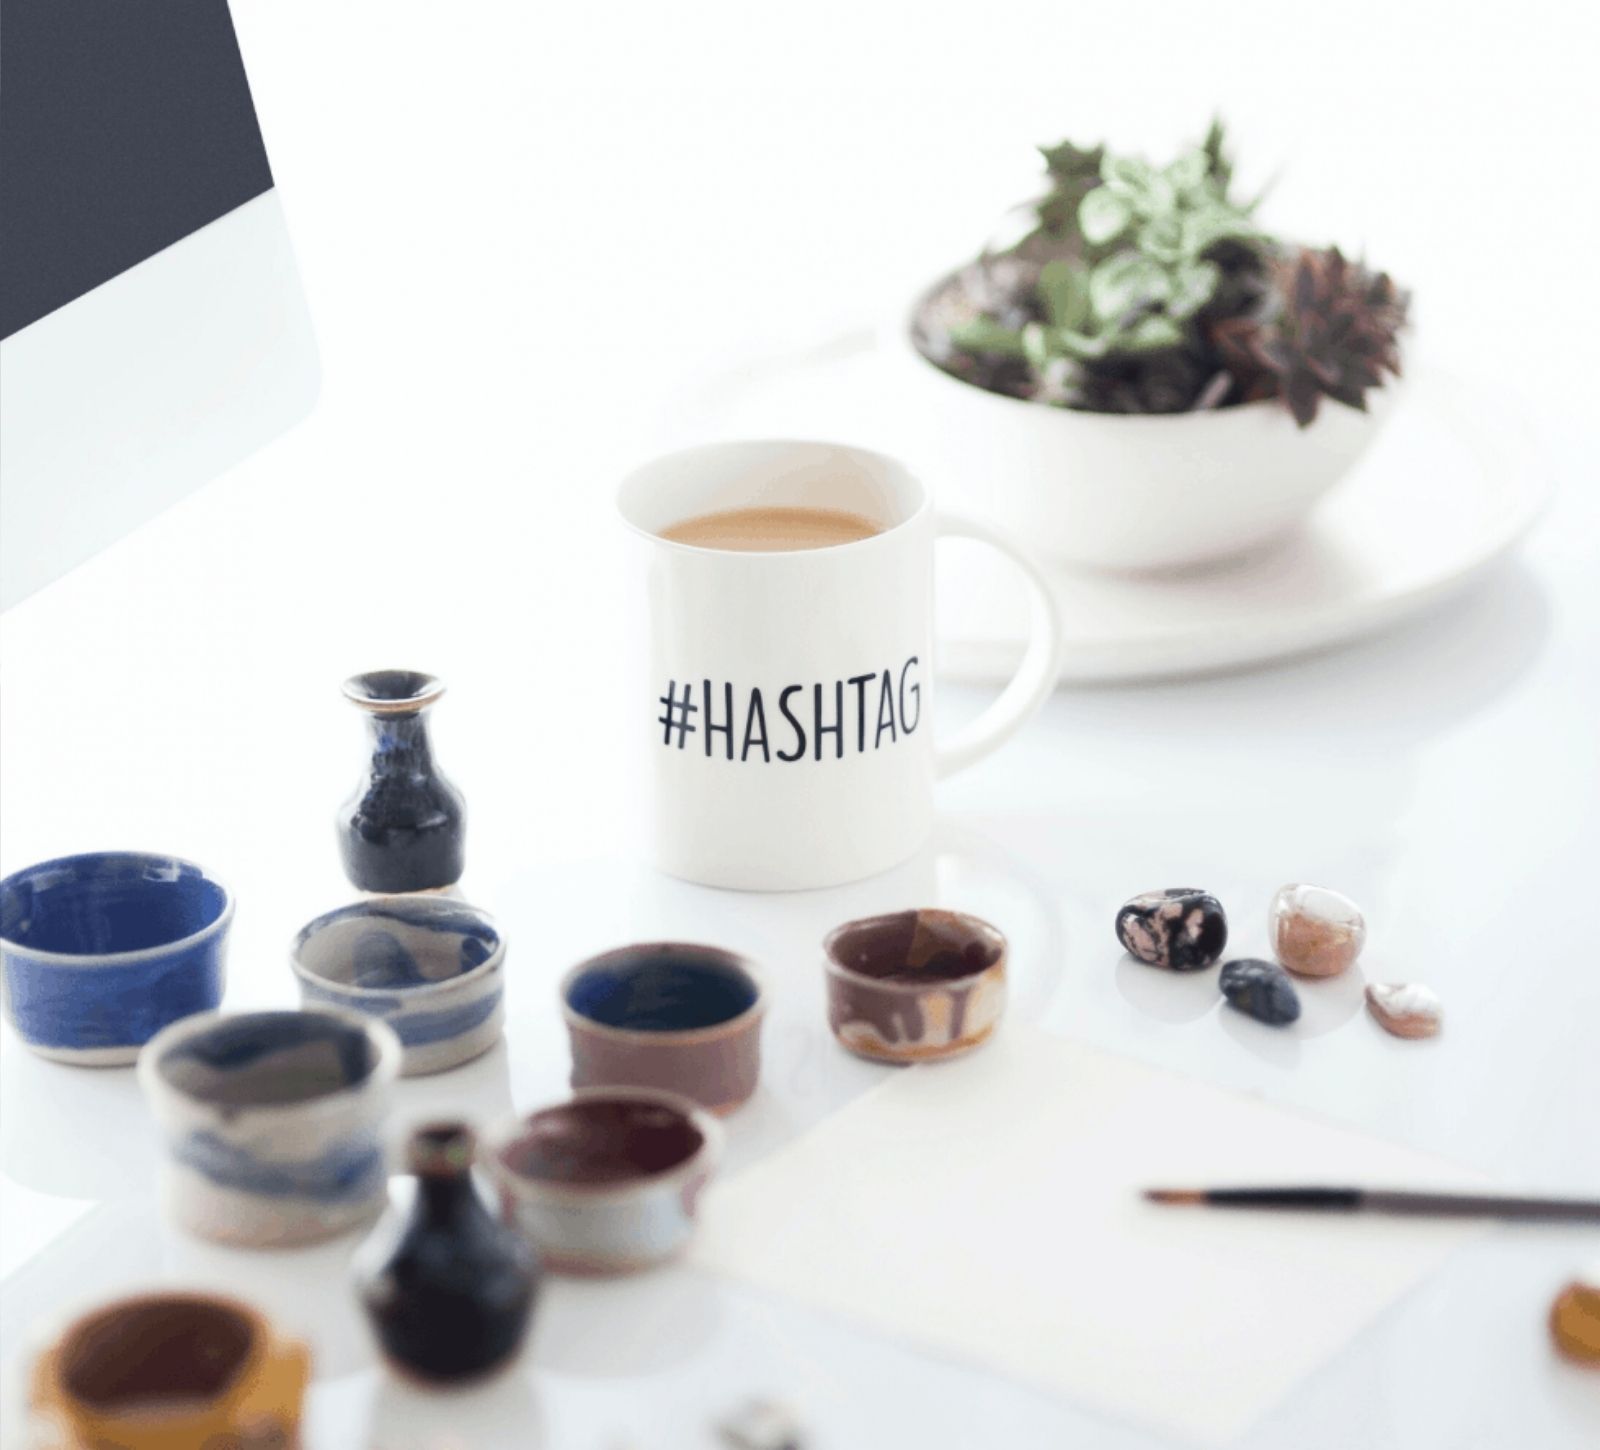 hashtag how to- social media tips - female entrepreneurs -kitchen table ceos - by tracy smith - blog - social media strategy - hashtag tips